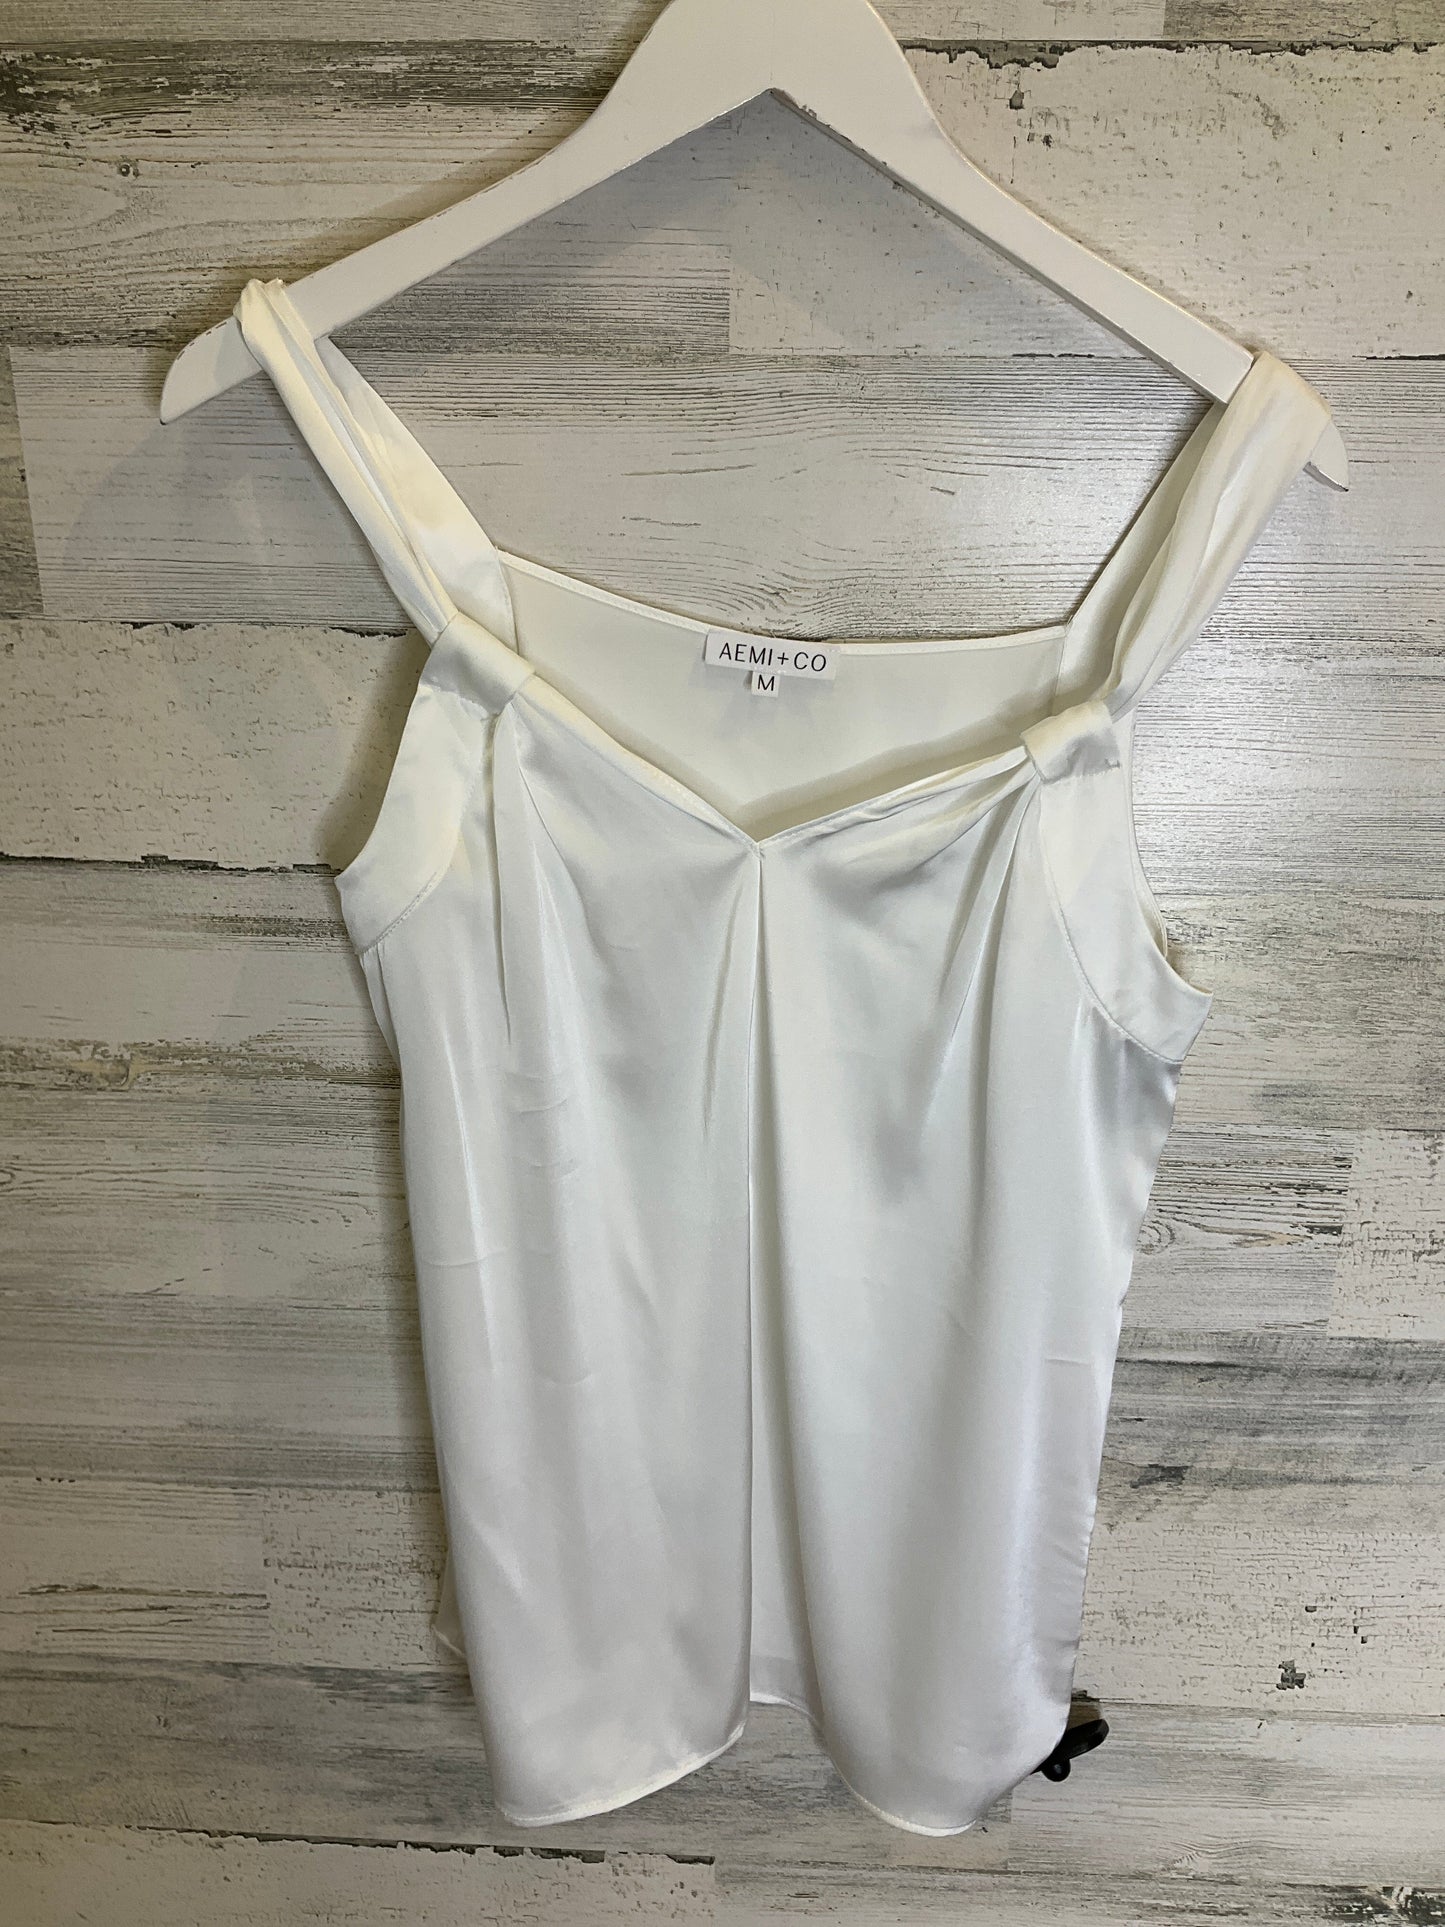 White Top Sleeveless Clothes Mentor, Size M